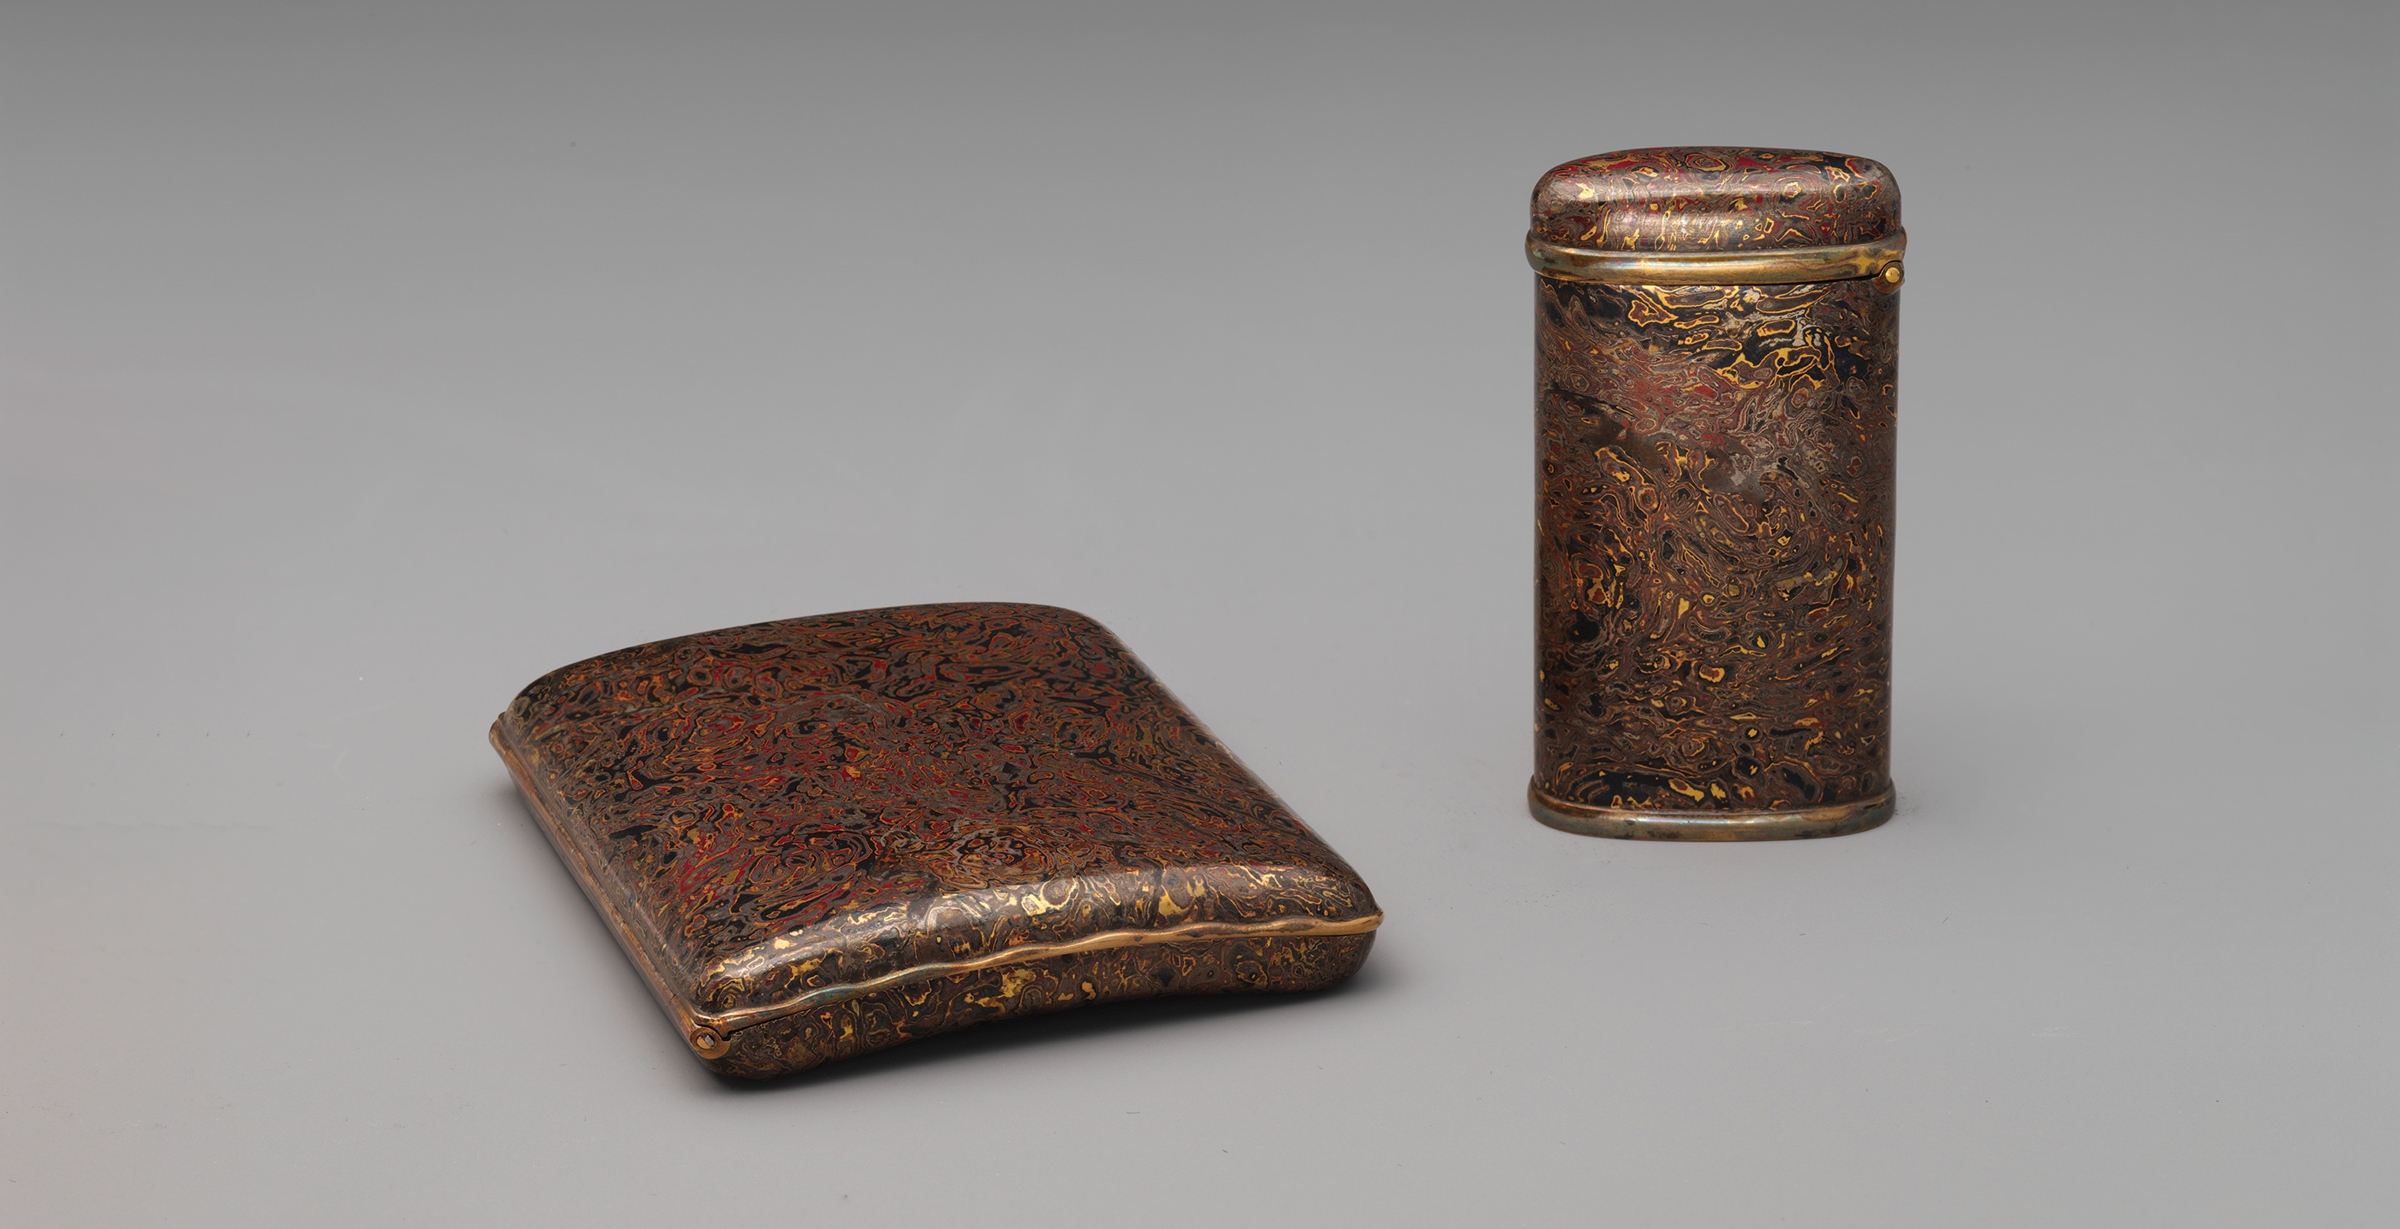 A flat cigarette case and a tall match case in a matching wood grain pattern rendered in deep red, black, brown, and gold metals. 